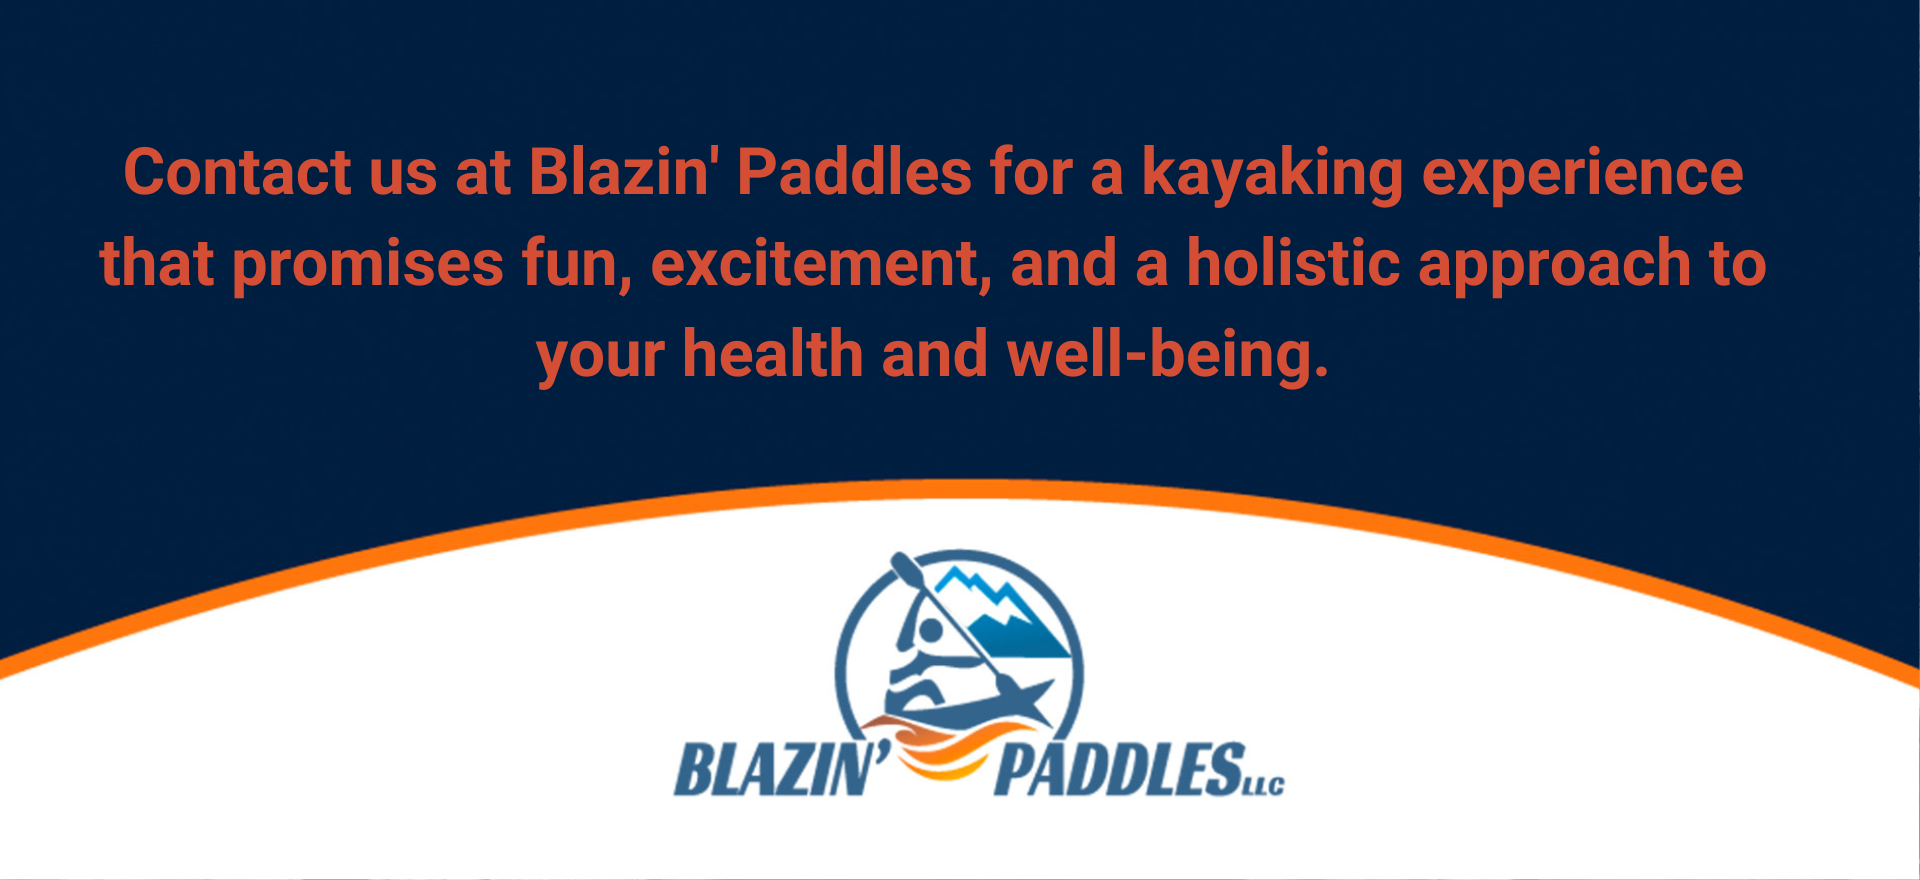 Contact Us at Blazin Paddles for a kayaking experience that promises fun, excitement, and a holistic approach to your health and well-being.